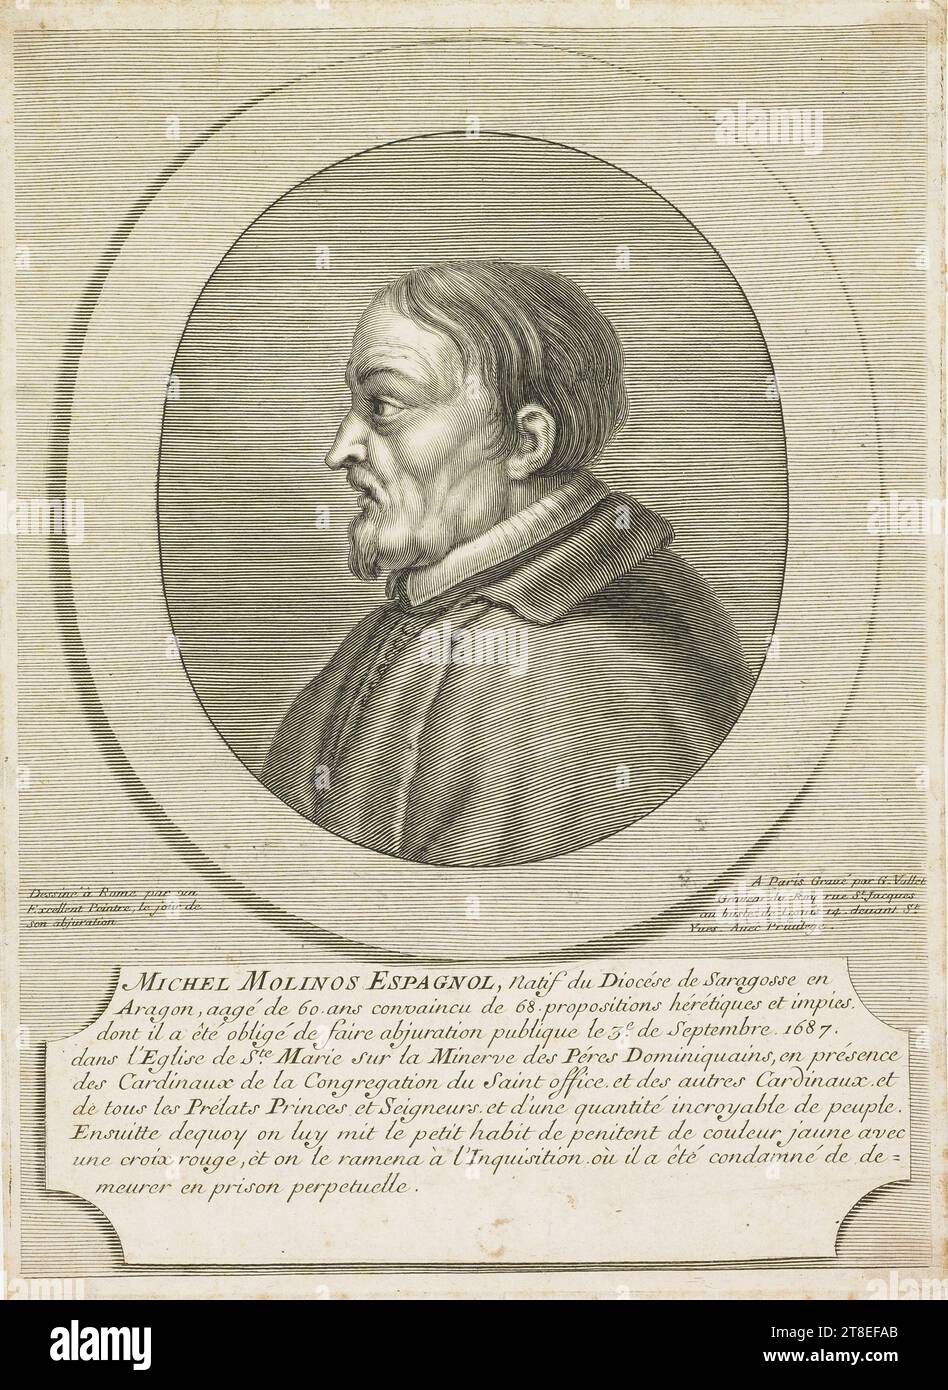 Drawn in Rome by an Excellent Painter, the day of his abjuration. In Paris Engraved by G. vallet Graveur du Roy rue St. Jacques at the bust of Louis 14. before St. Vues. With Privilege. MICHEL MOLINOS SPANISH, Natof of the Diocese of Saragossa in Aragon, 60. years old convinced of 68.heterotic and impious propositions. of which he was obliged to make public abjuration the 3rd. of September 1687. in the Church of Ste. Marie On the Minerva of the Dominican Fathers, in the presence of the Cardinals of the Congregation of the Holy office Stock Photo